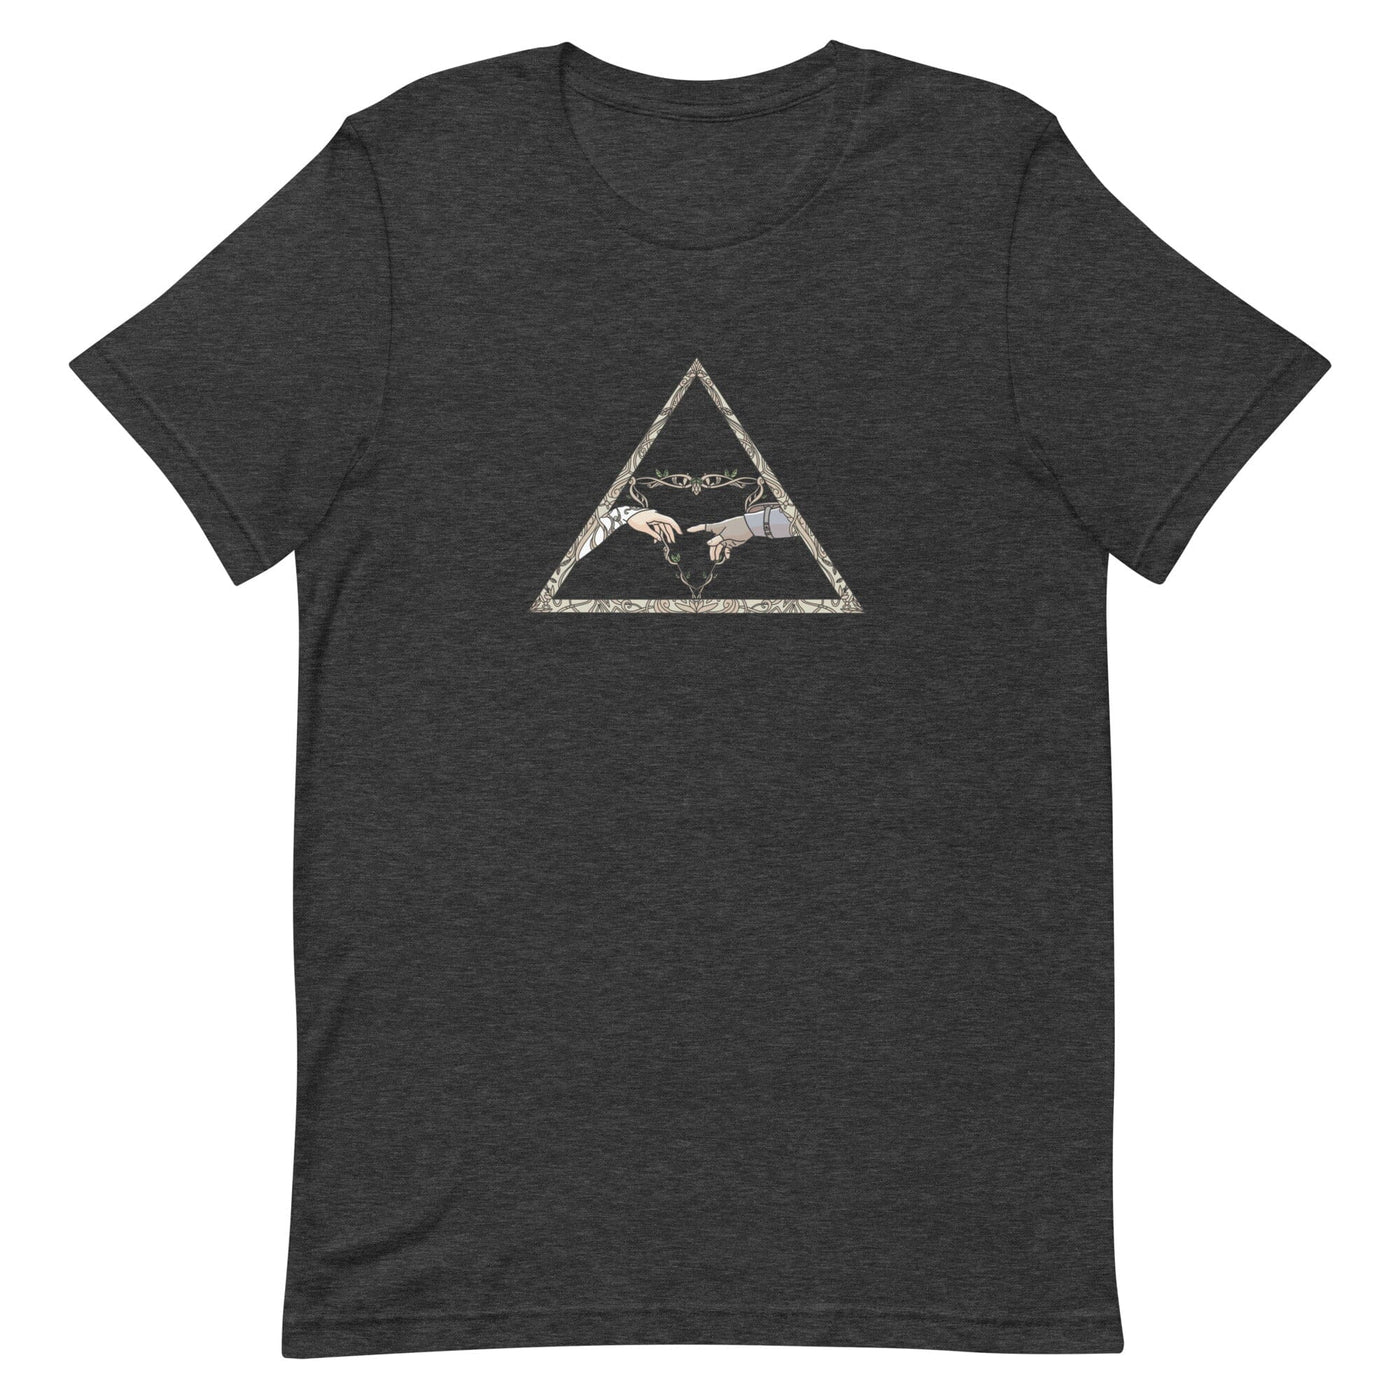 The Creation | Short-Sleeve Unisex T-Shirt | The Legend of Zelda T-Shirt Threads and Thistles Inventory Dark Grey Heather S 